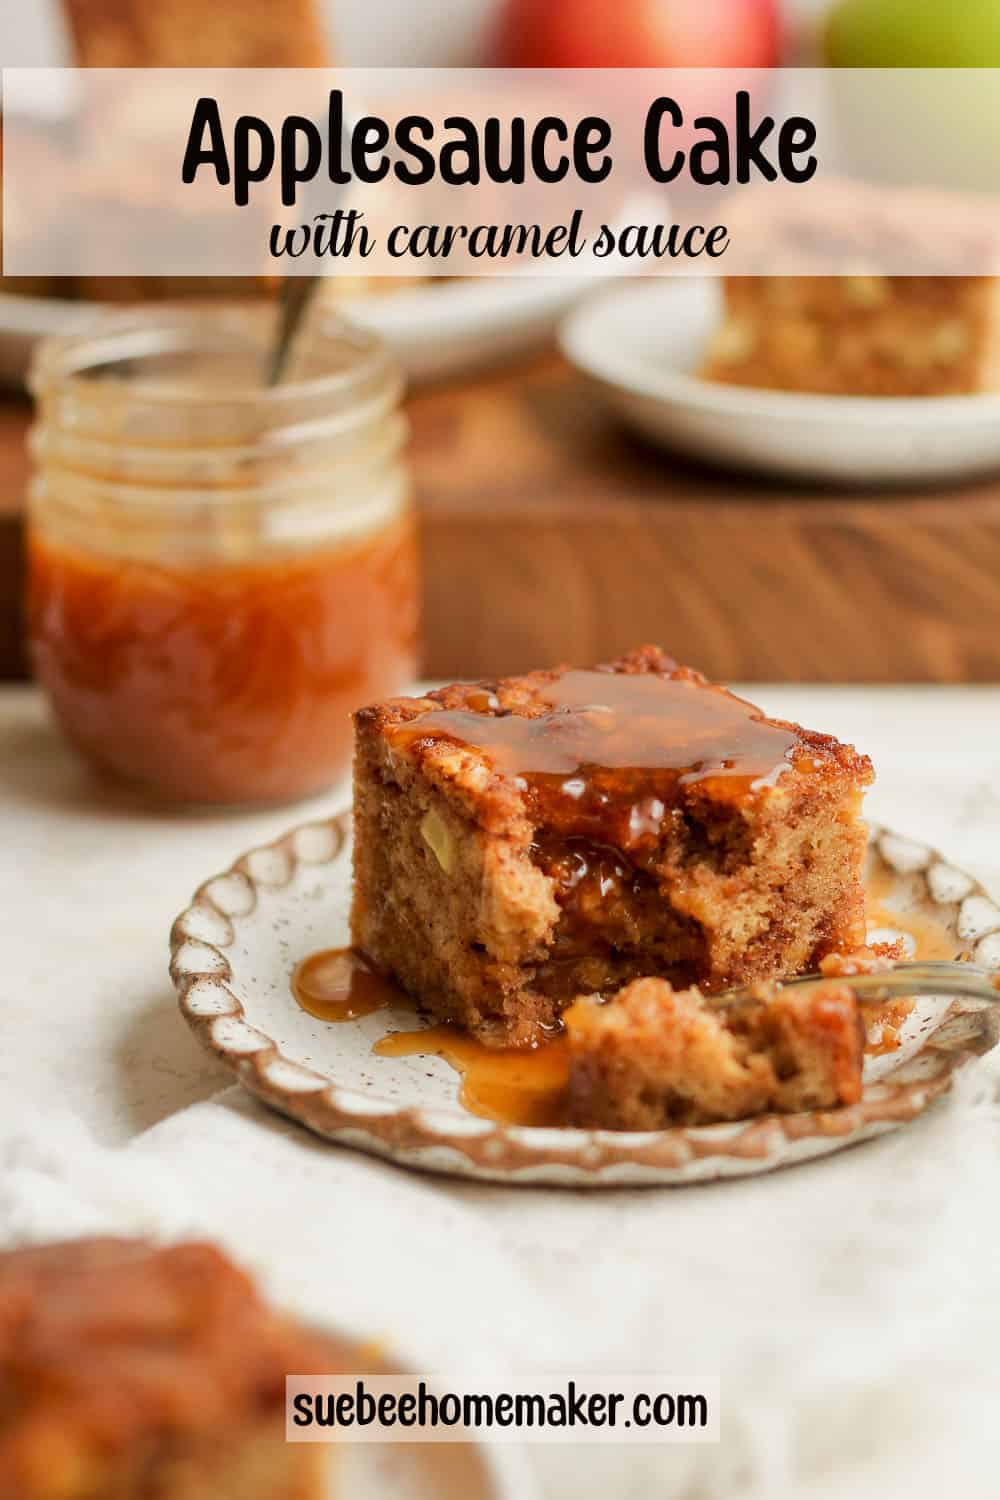 Side view of a piece of apple cake with caramel sauce, and a jar of caramel in the background.